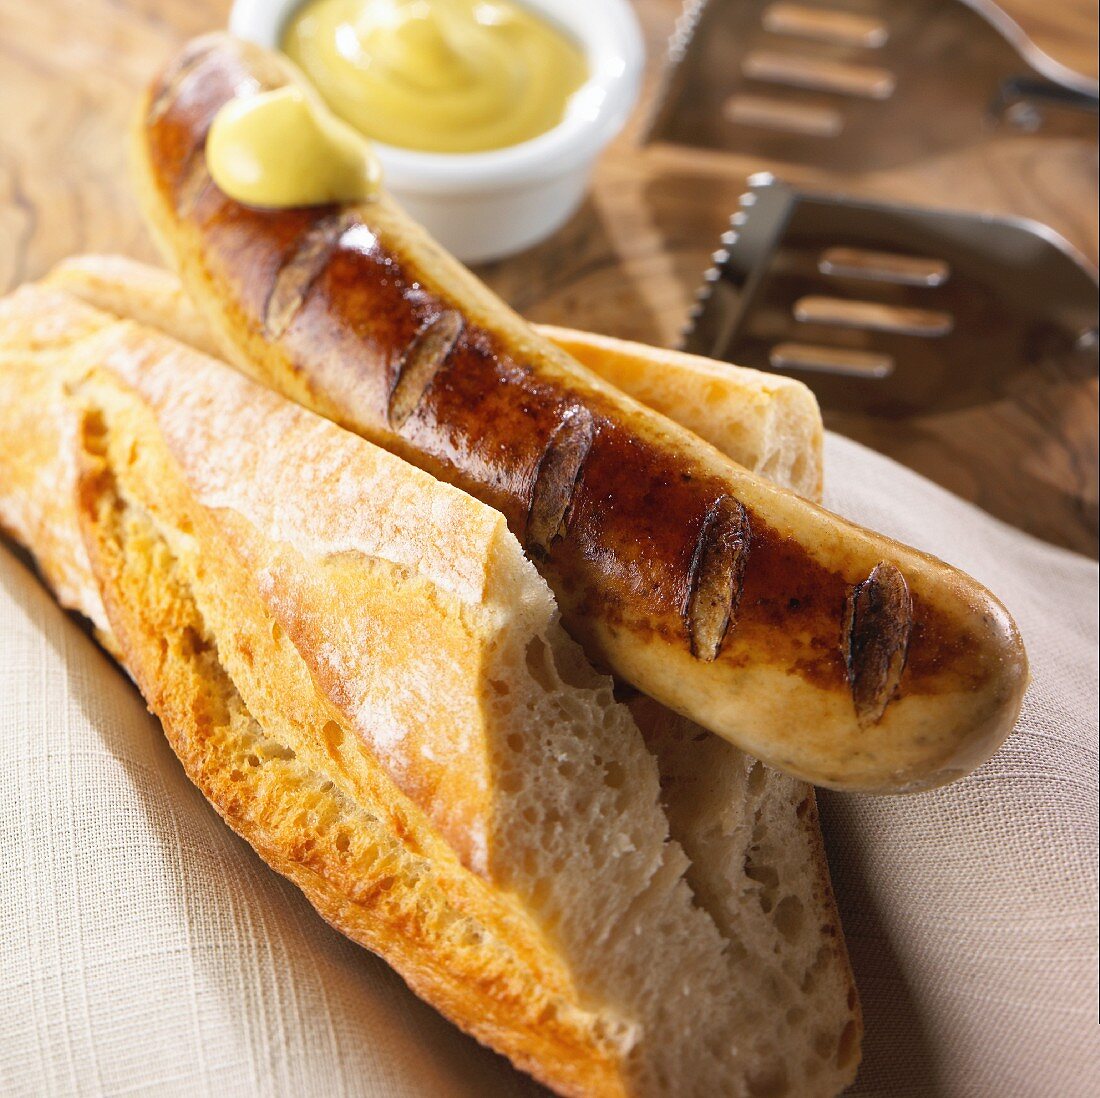 Grilled bratwurst with baguette and mustard